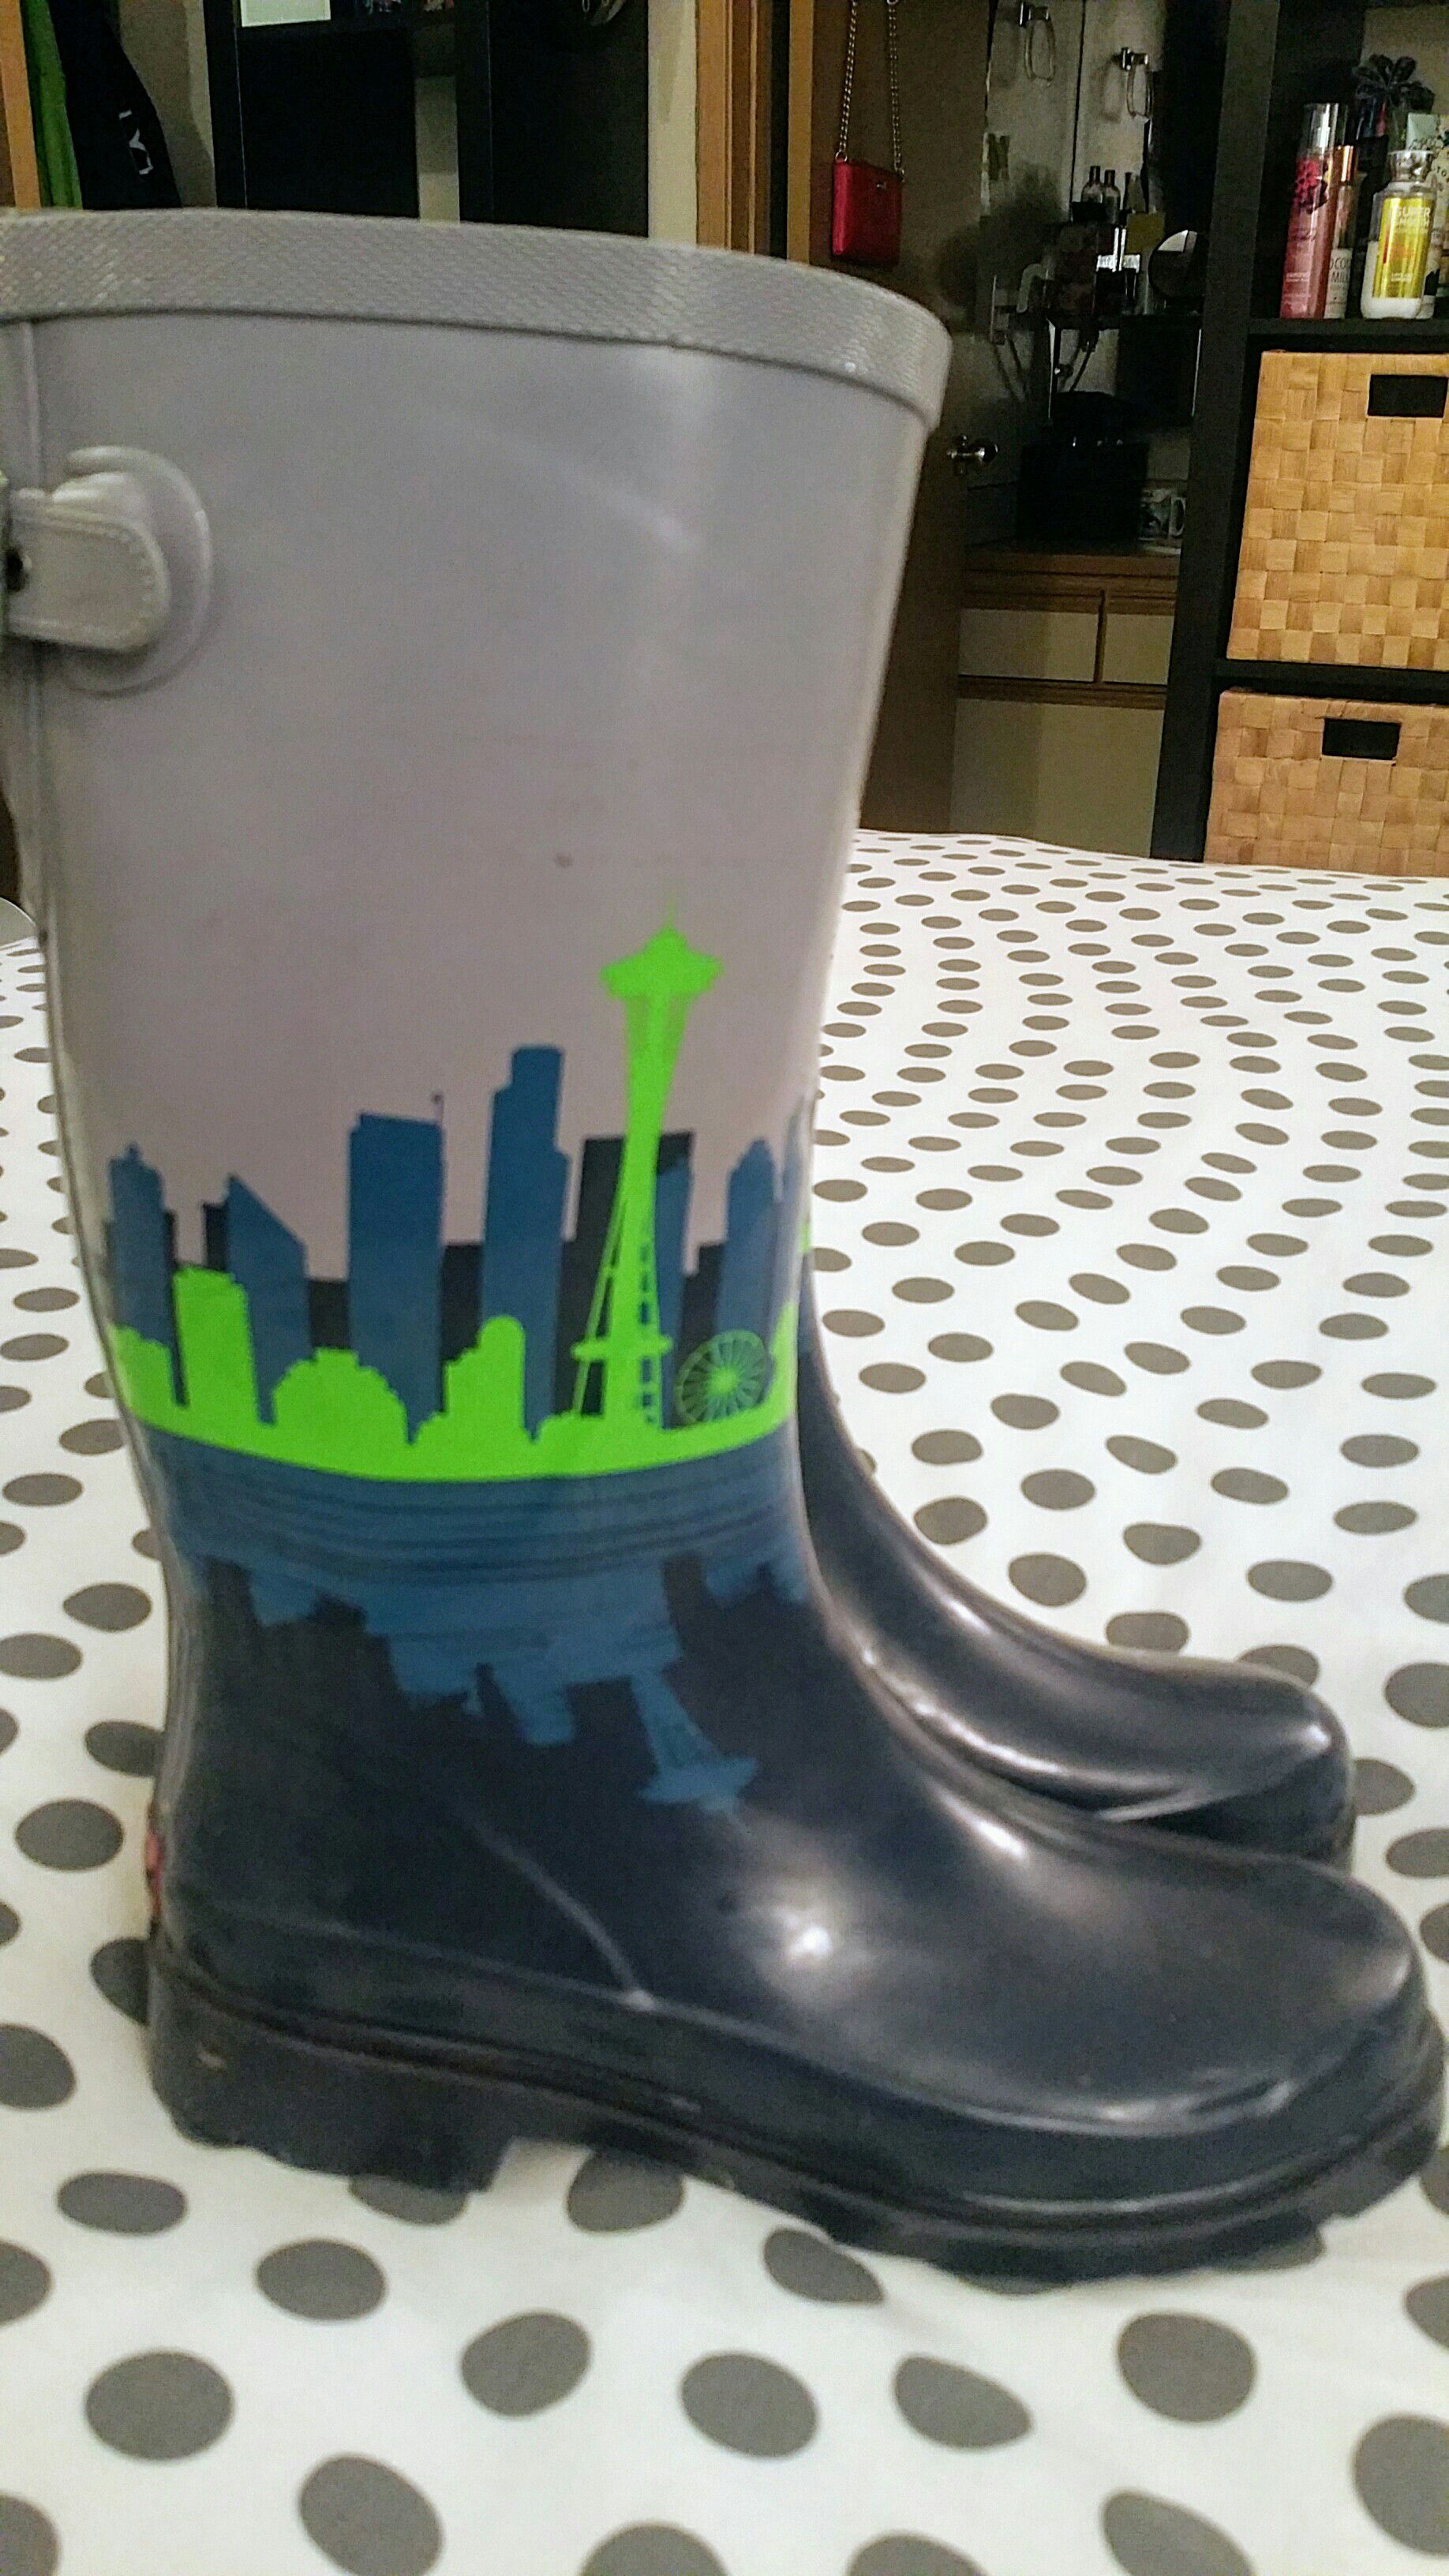 Get your Seahawk/Seattle skyline rain boots now!!